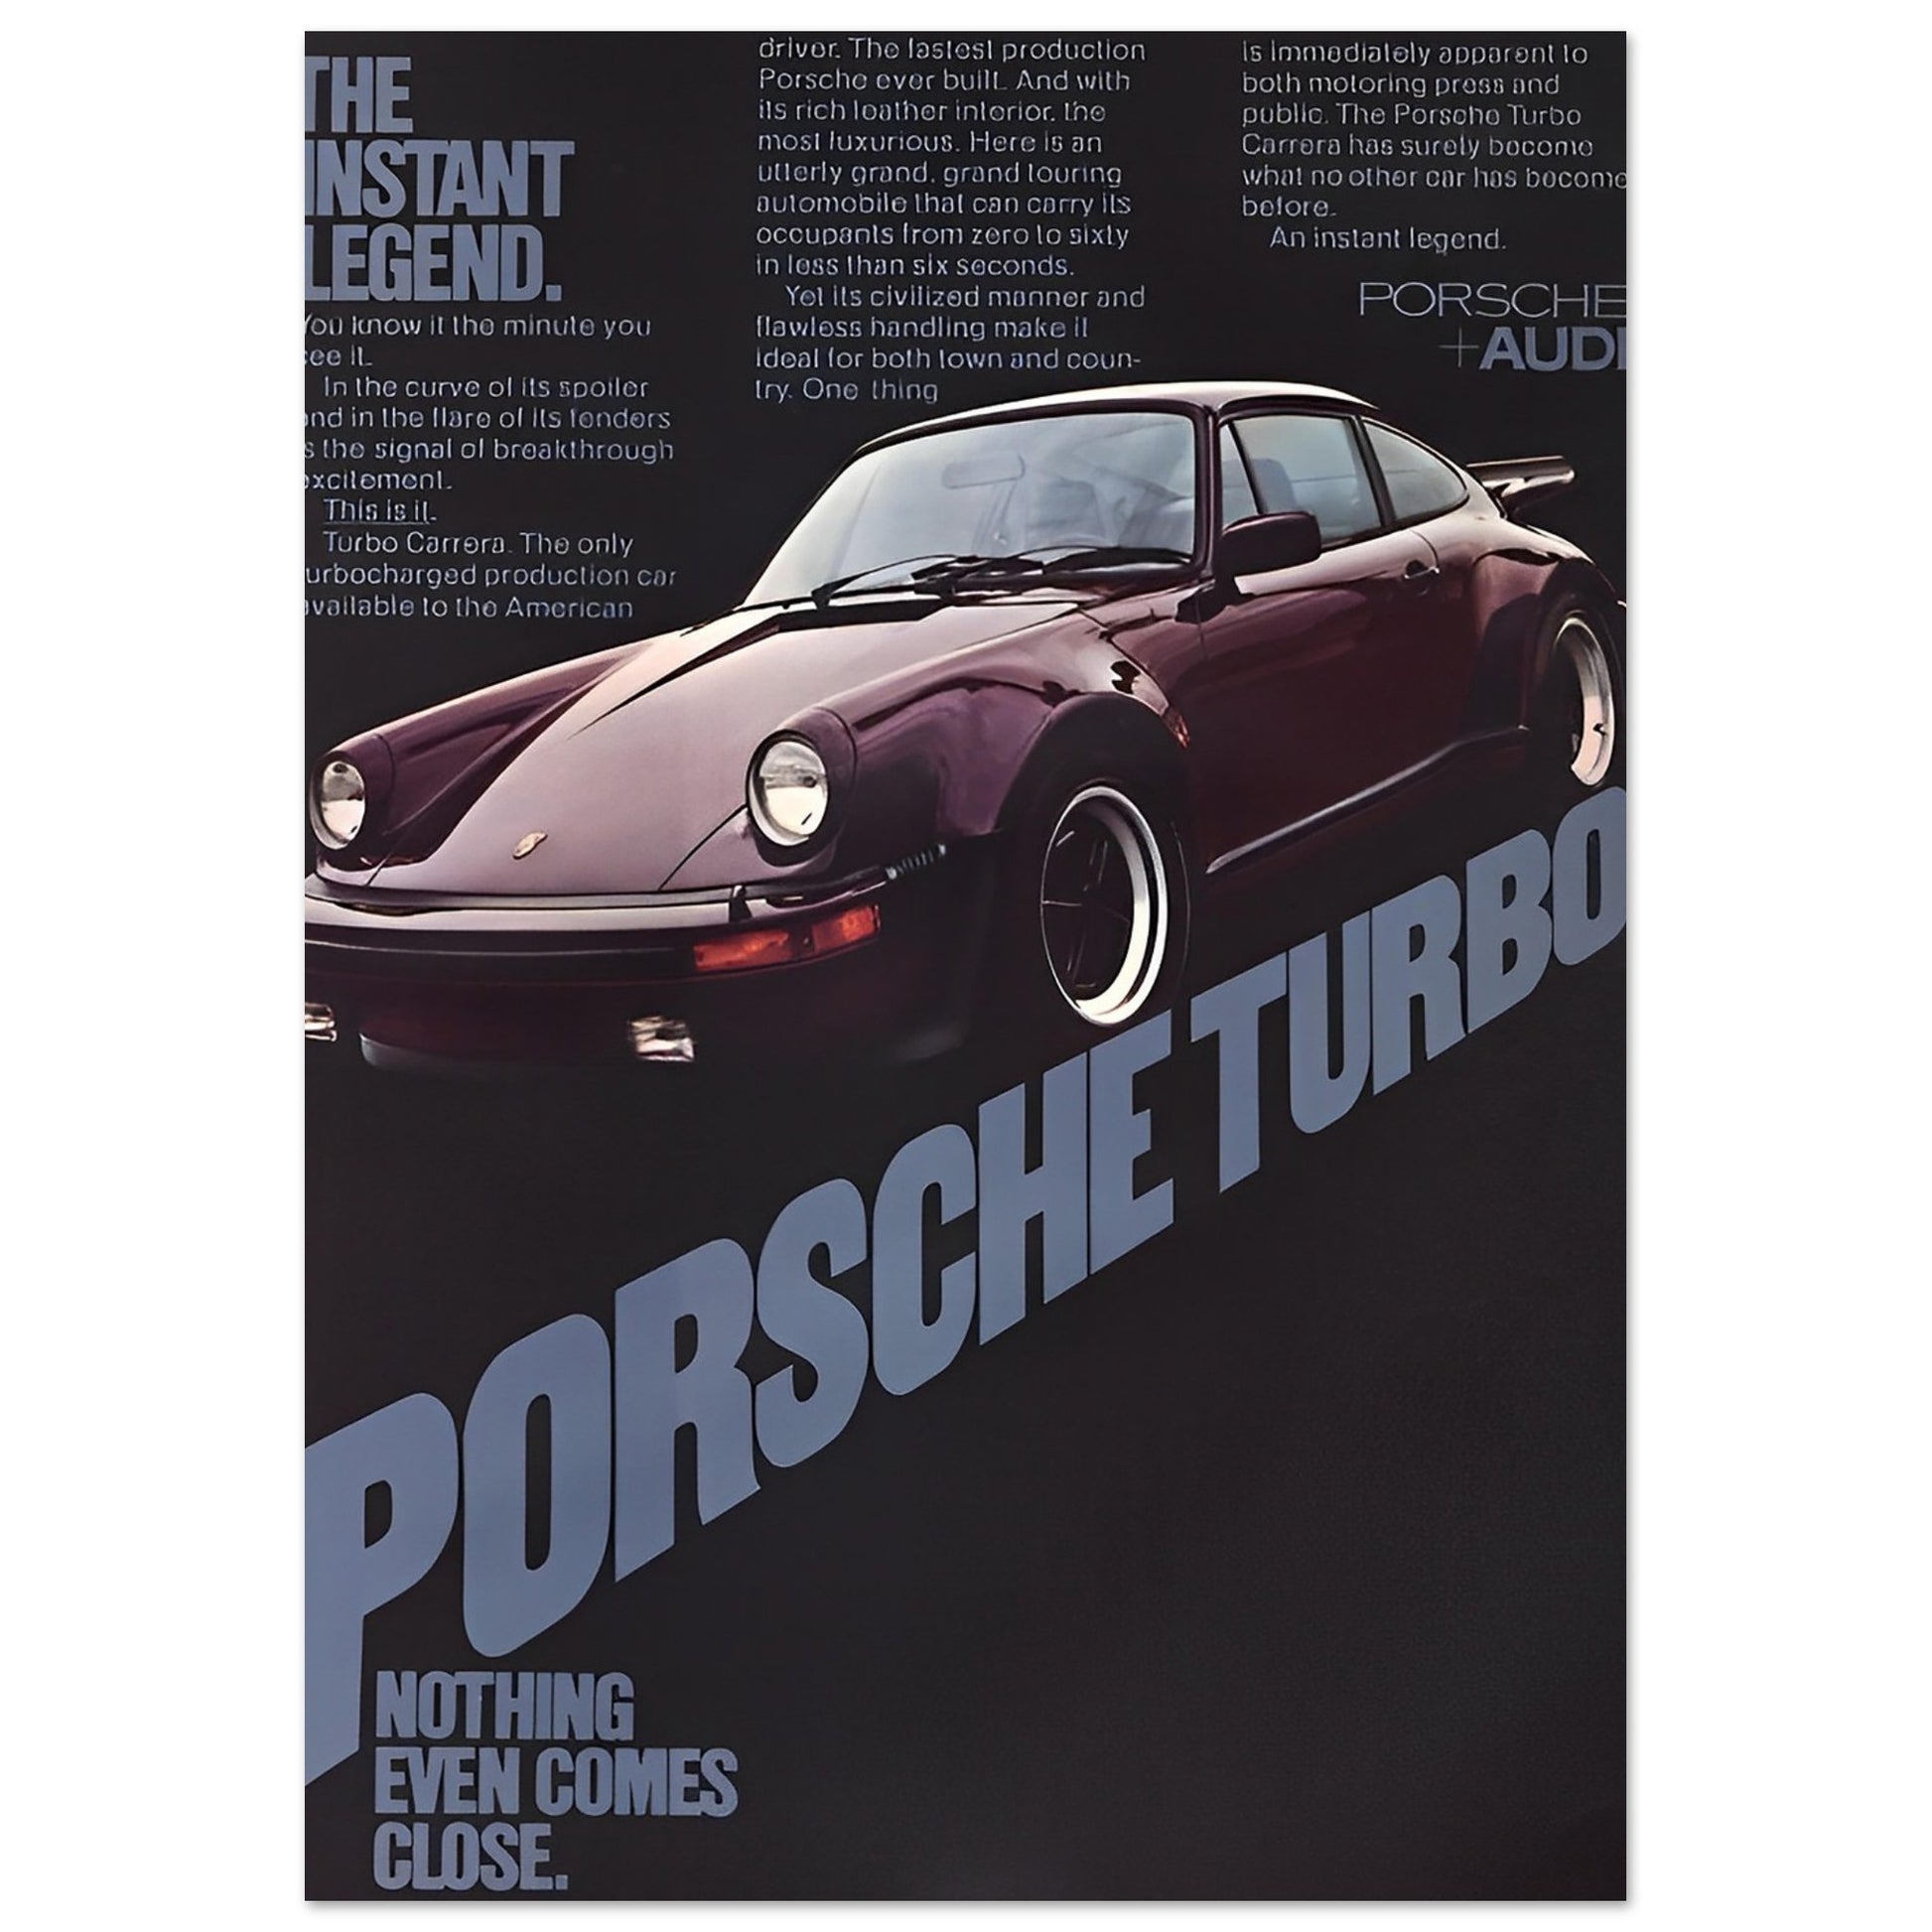 Porsche 911 (930) Turbo Poster: "Nothing Even Comes Close"